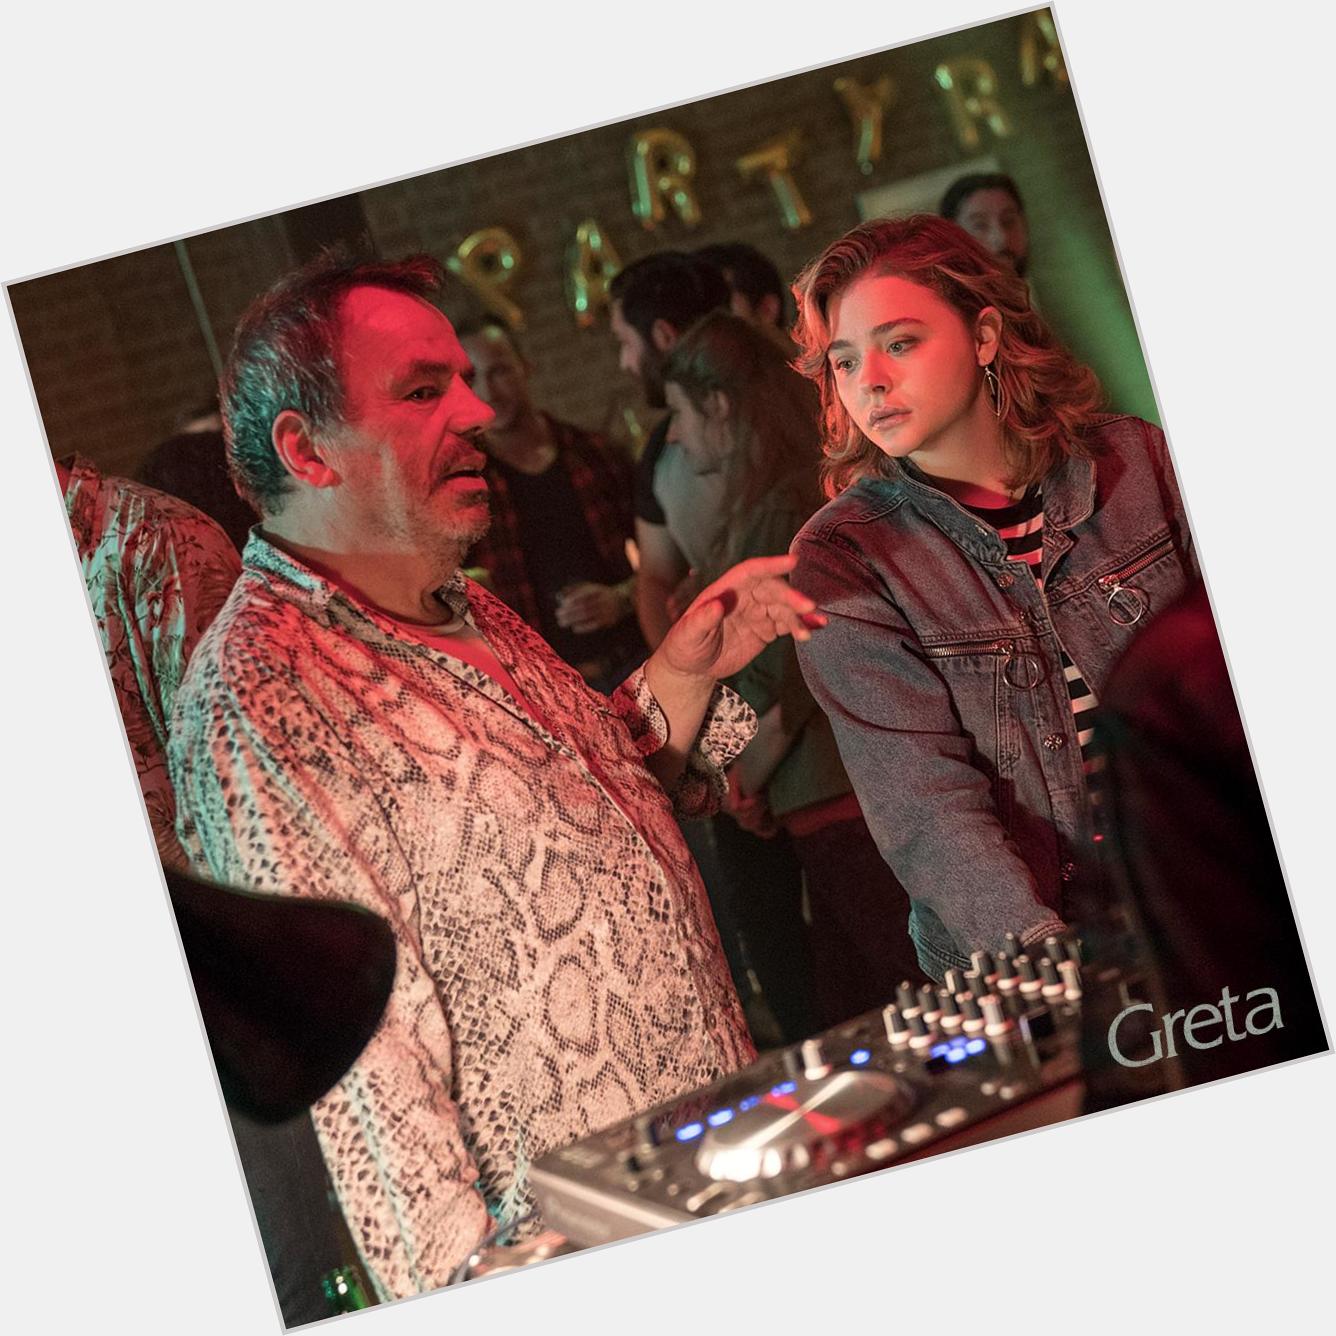 Wishing a very Happy Birthday to our director Neil Jordan. See the film in theaters this Friday. 